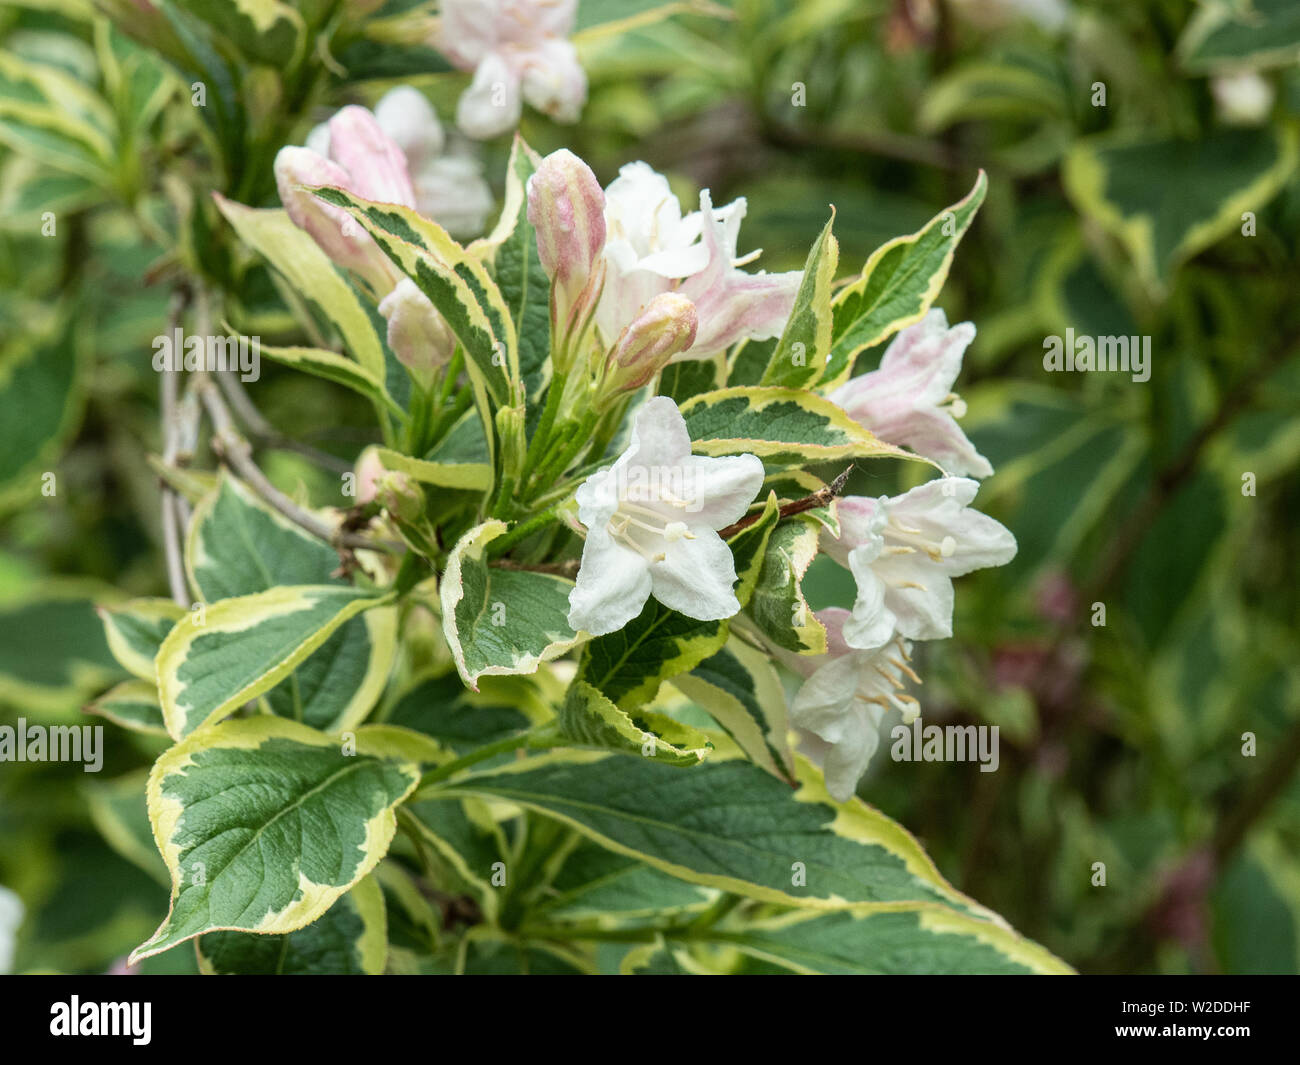 A close up of a branch of Weigela florida variegata showing the very pale pink flowers and variegated foliage Stock Photo